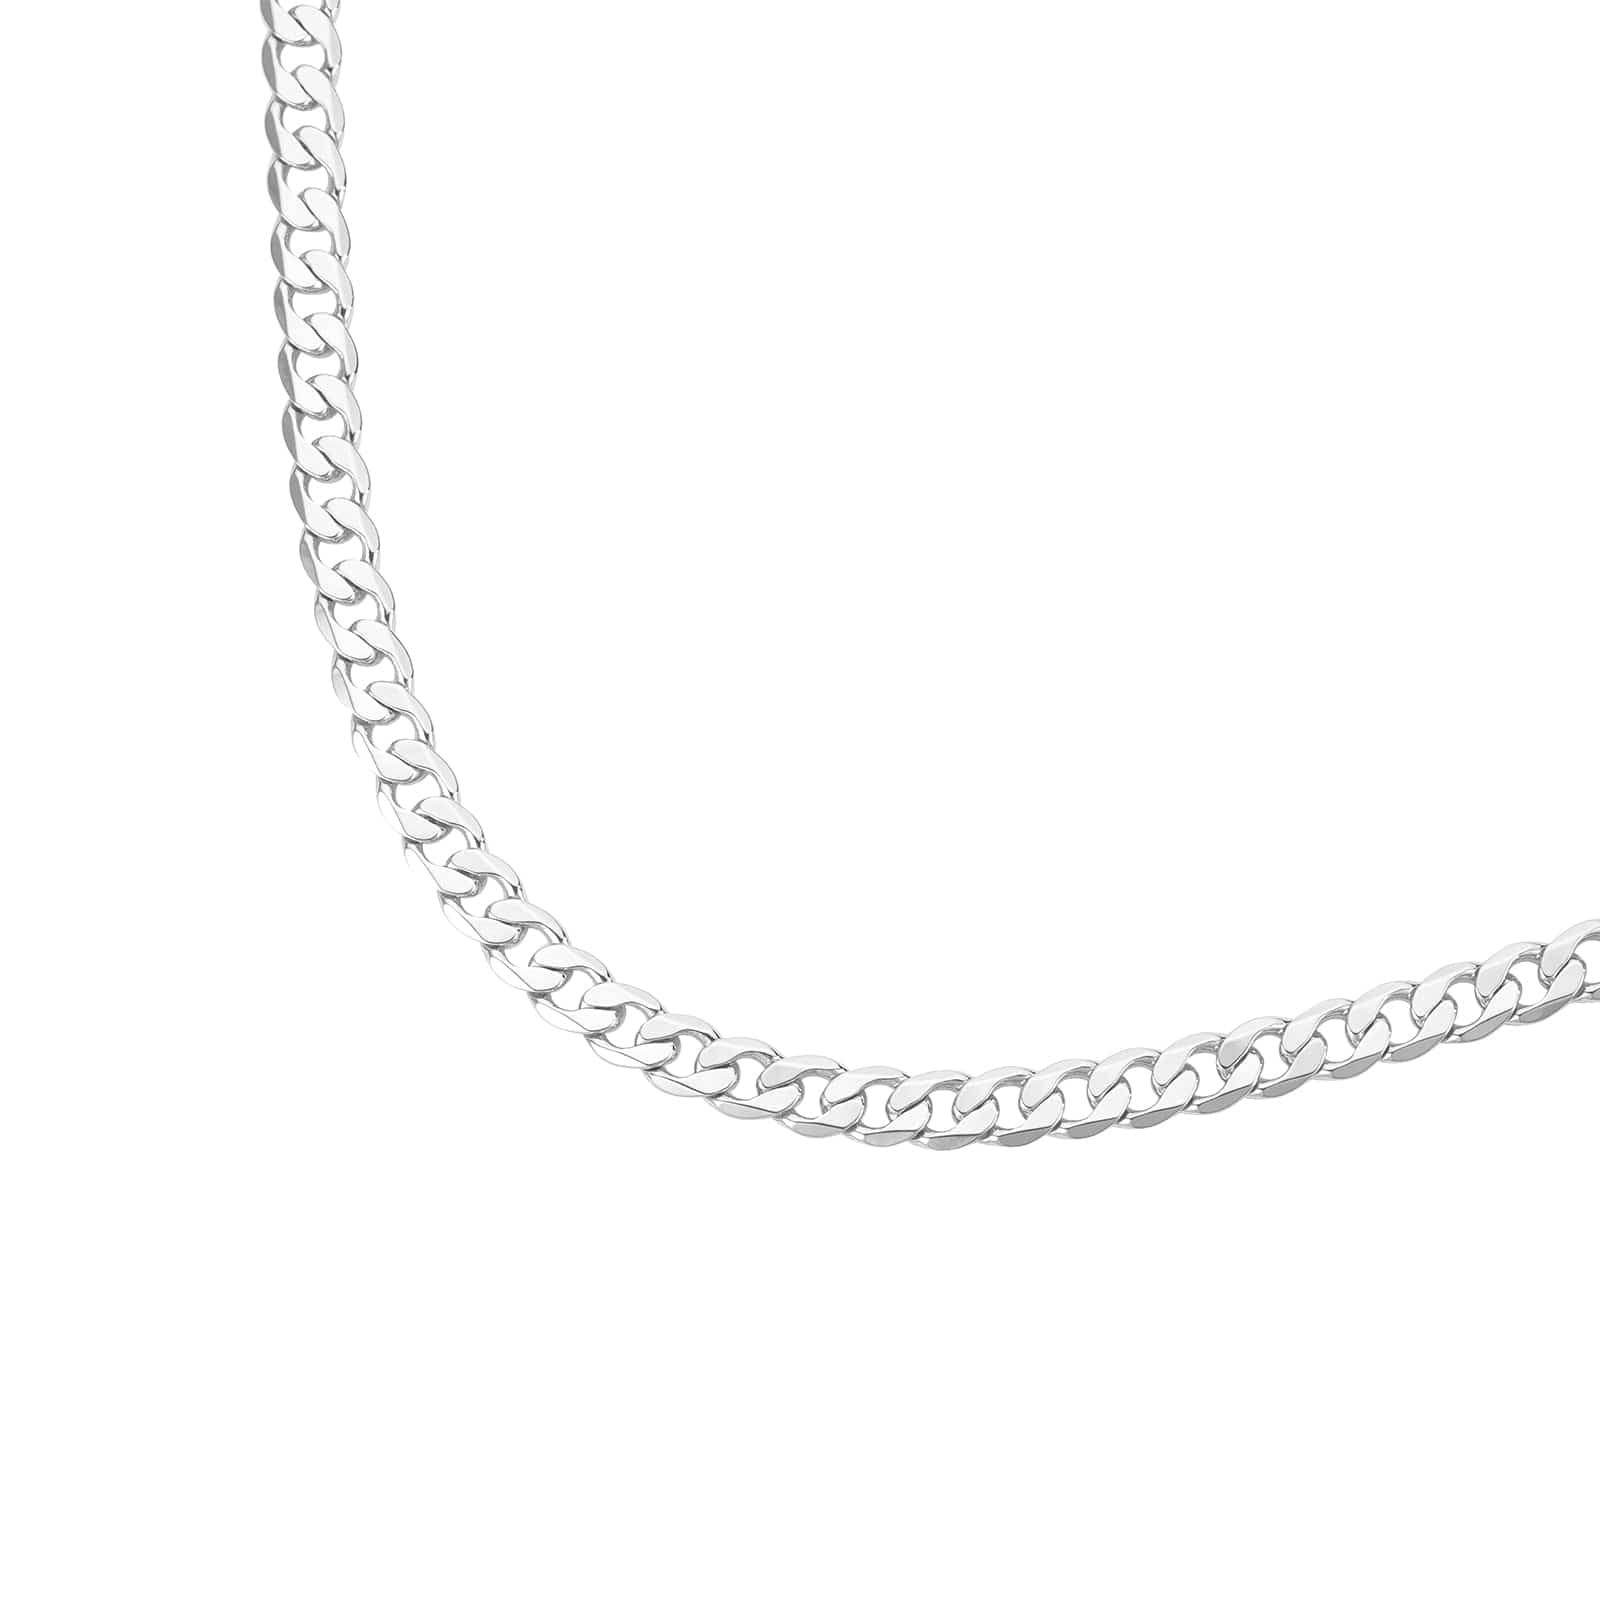 Gold Dipped Chains Curb Chain 4mm - White Gold